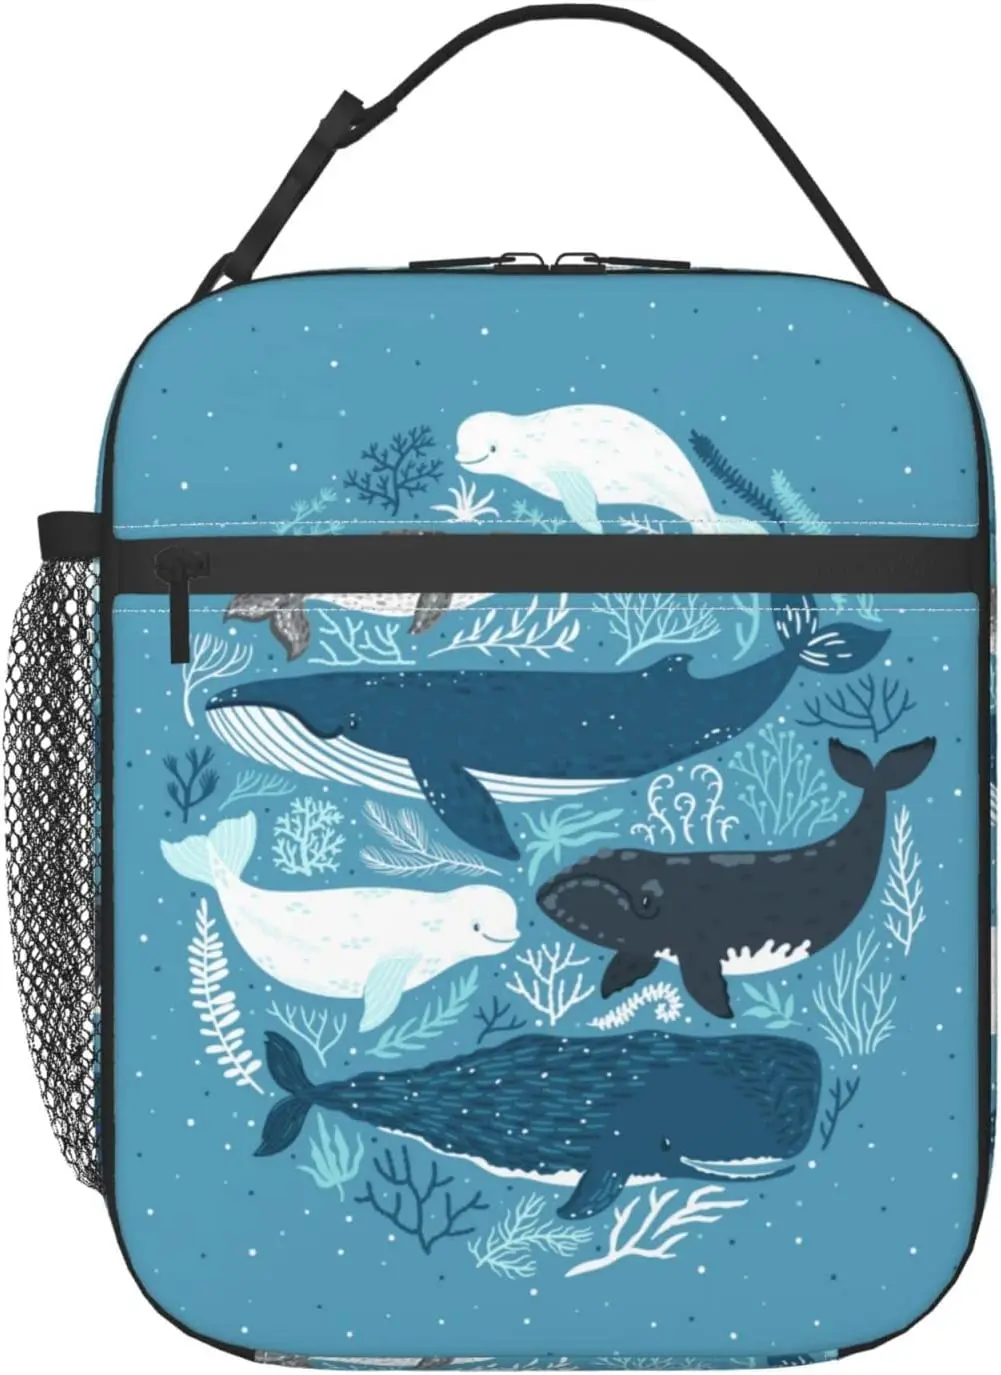 

Ocean Whale Sea Animals Lunch Bag Insulated Lunch Box Reusable Lunchbox Waterproof Portable Lunch Tote for Men Boys Girls